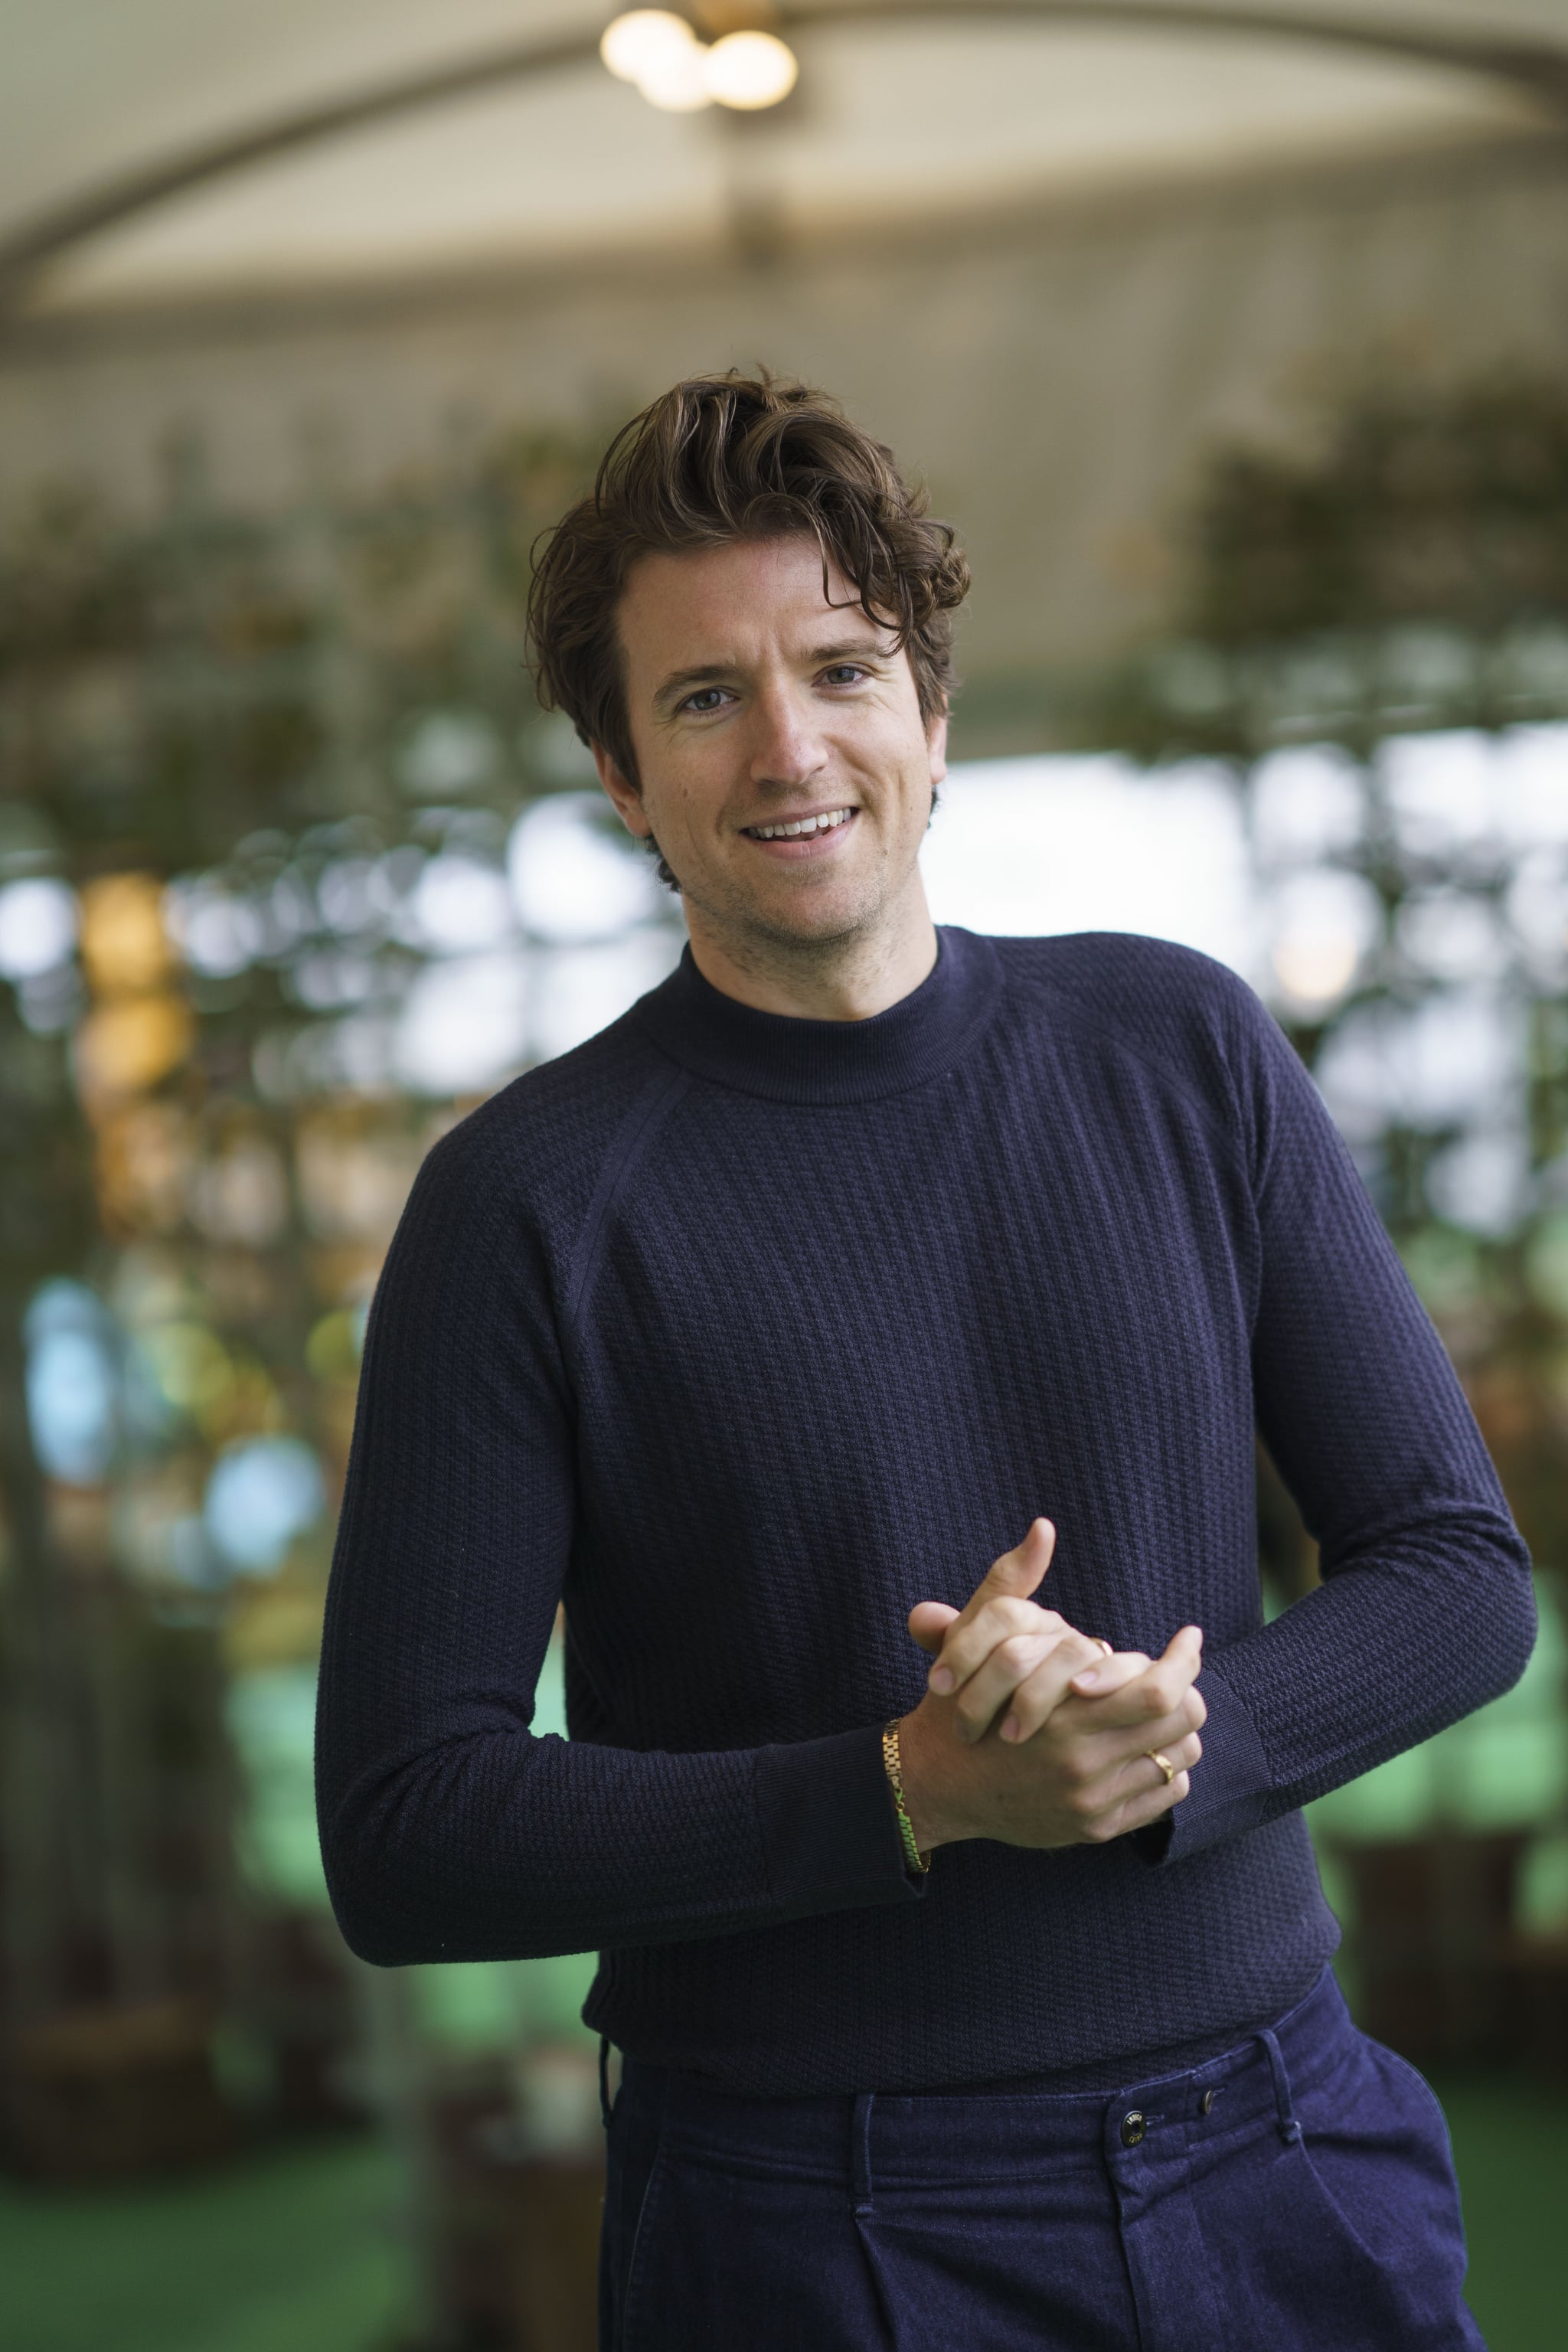 HAY-ON-WYE, WALES - JUNE 5: Greg James, radio and TV presenter, at the Hay Festival on June 5, 2022 in Hay-on-Wye, Wales. (Photo by David Levenson/Getty Images)